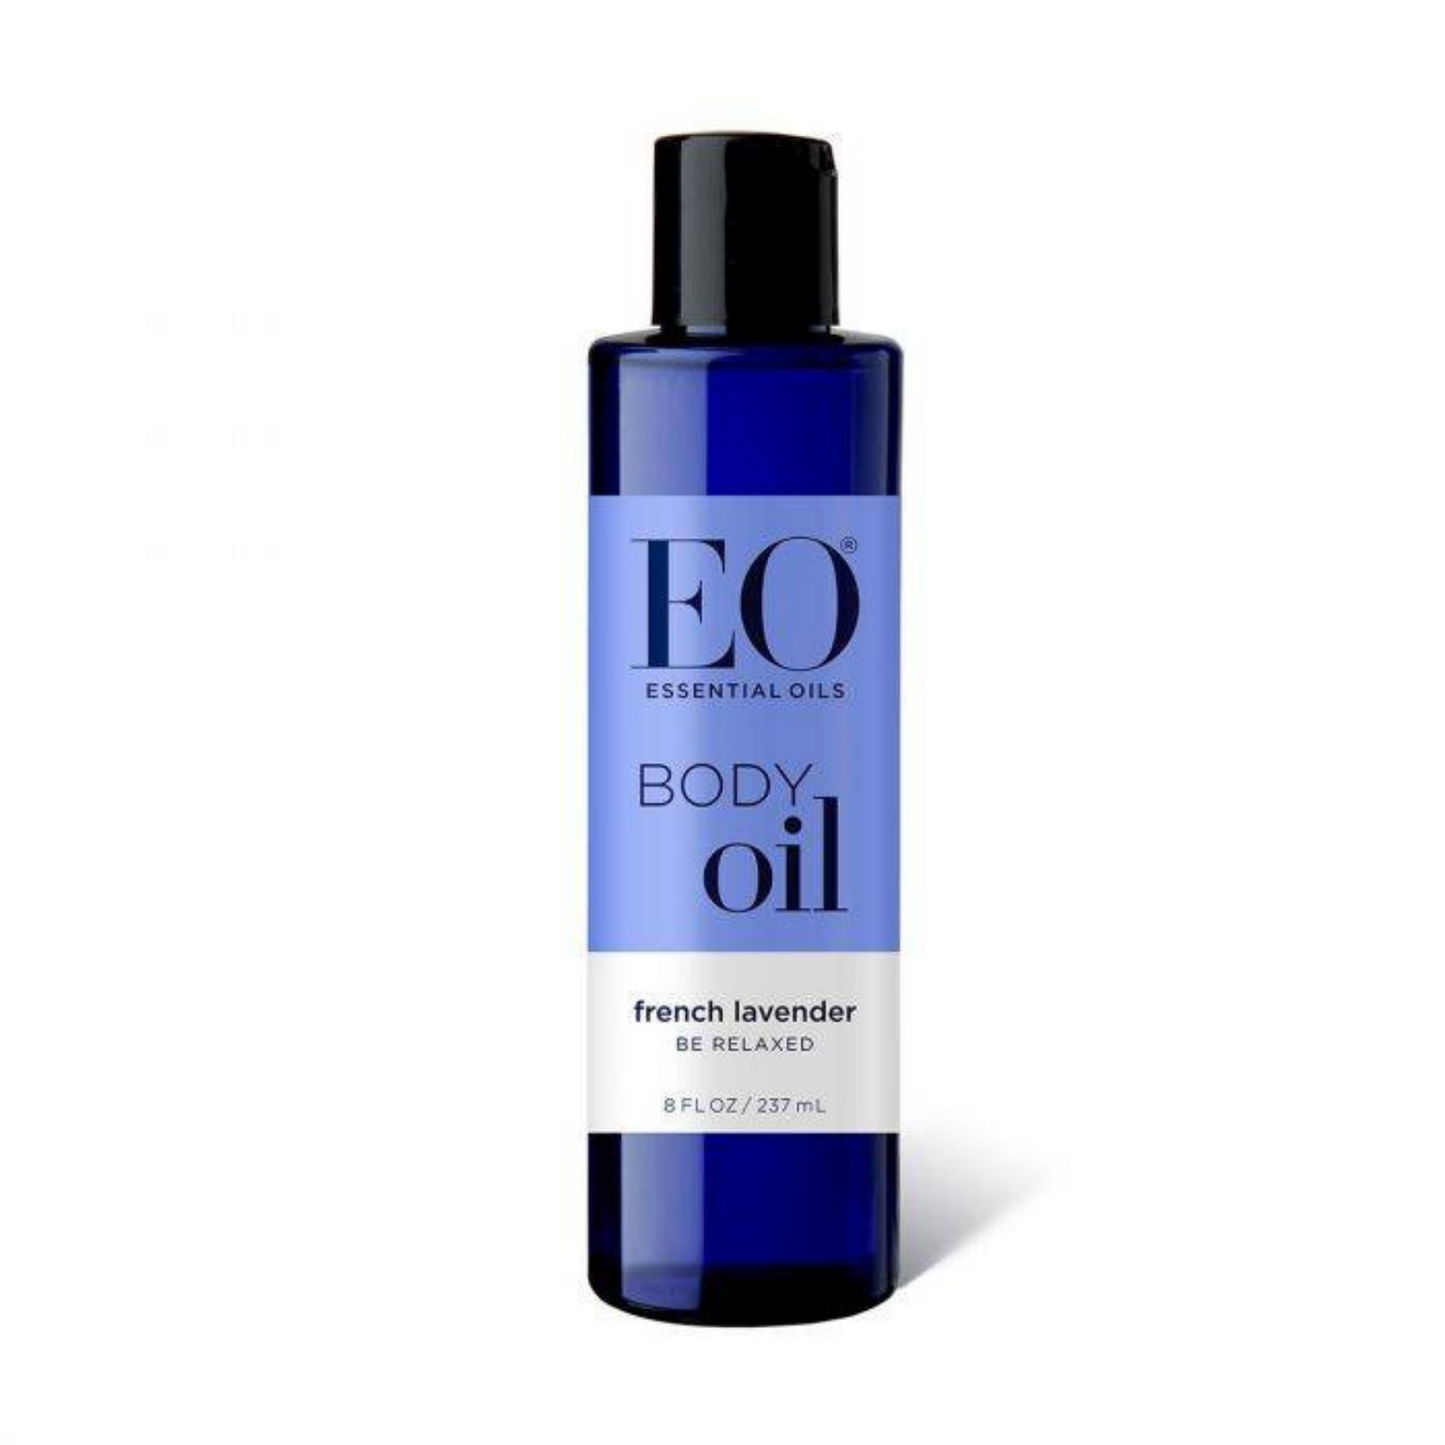 Primary image of French Lavender Body Oil